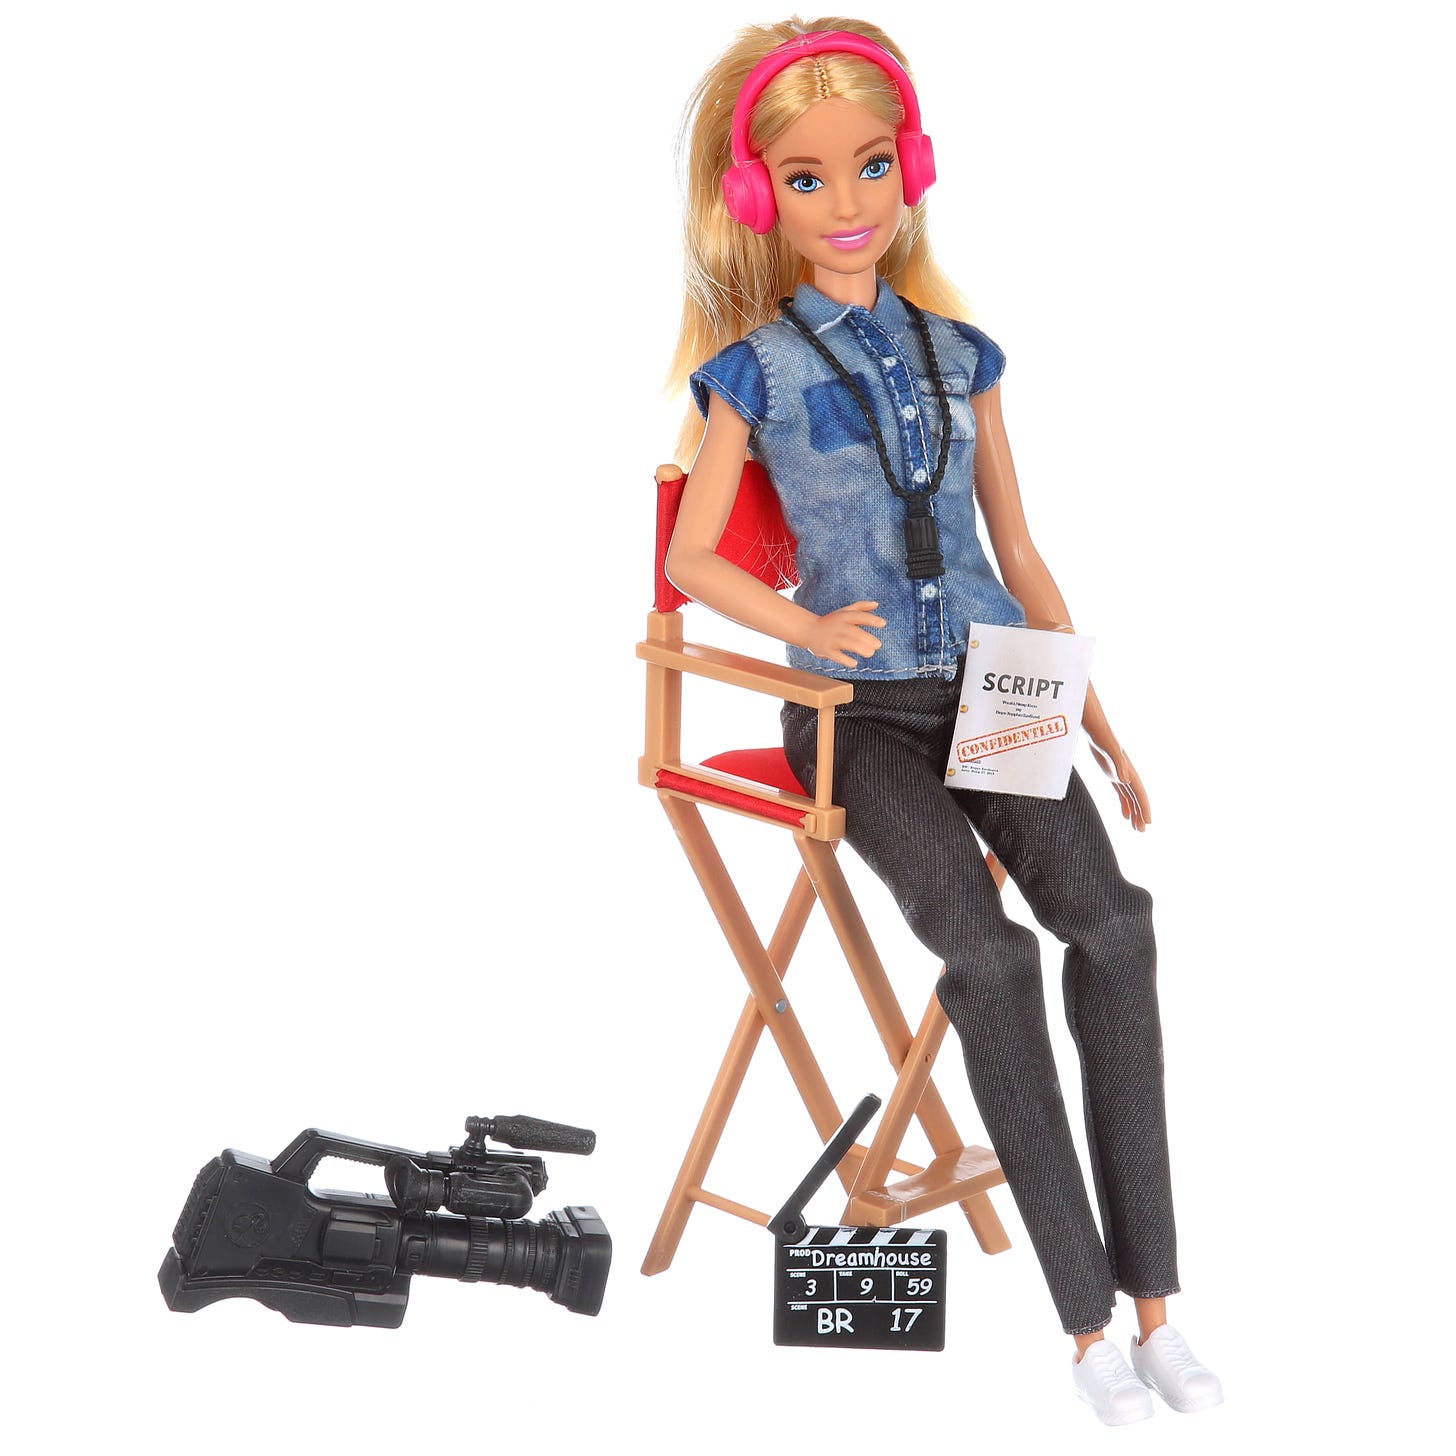 Barbie Film Director Playset with Doll, Chair, Camera and Accessories -  Walmart.com